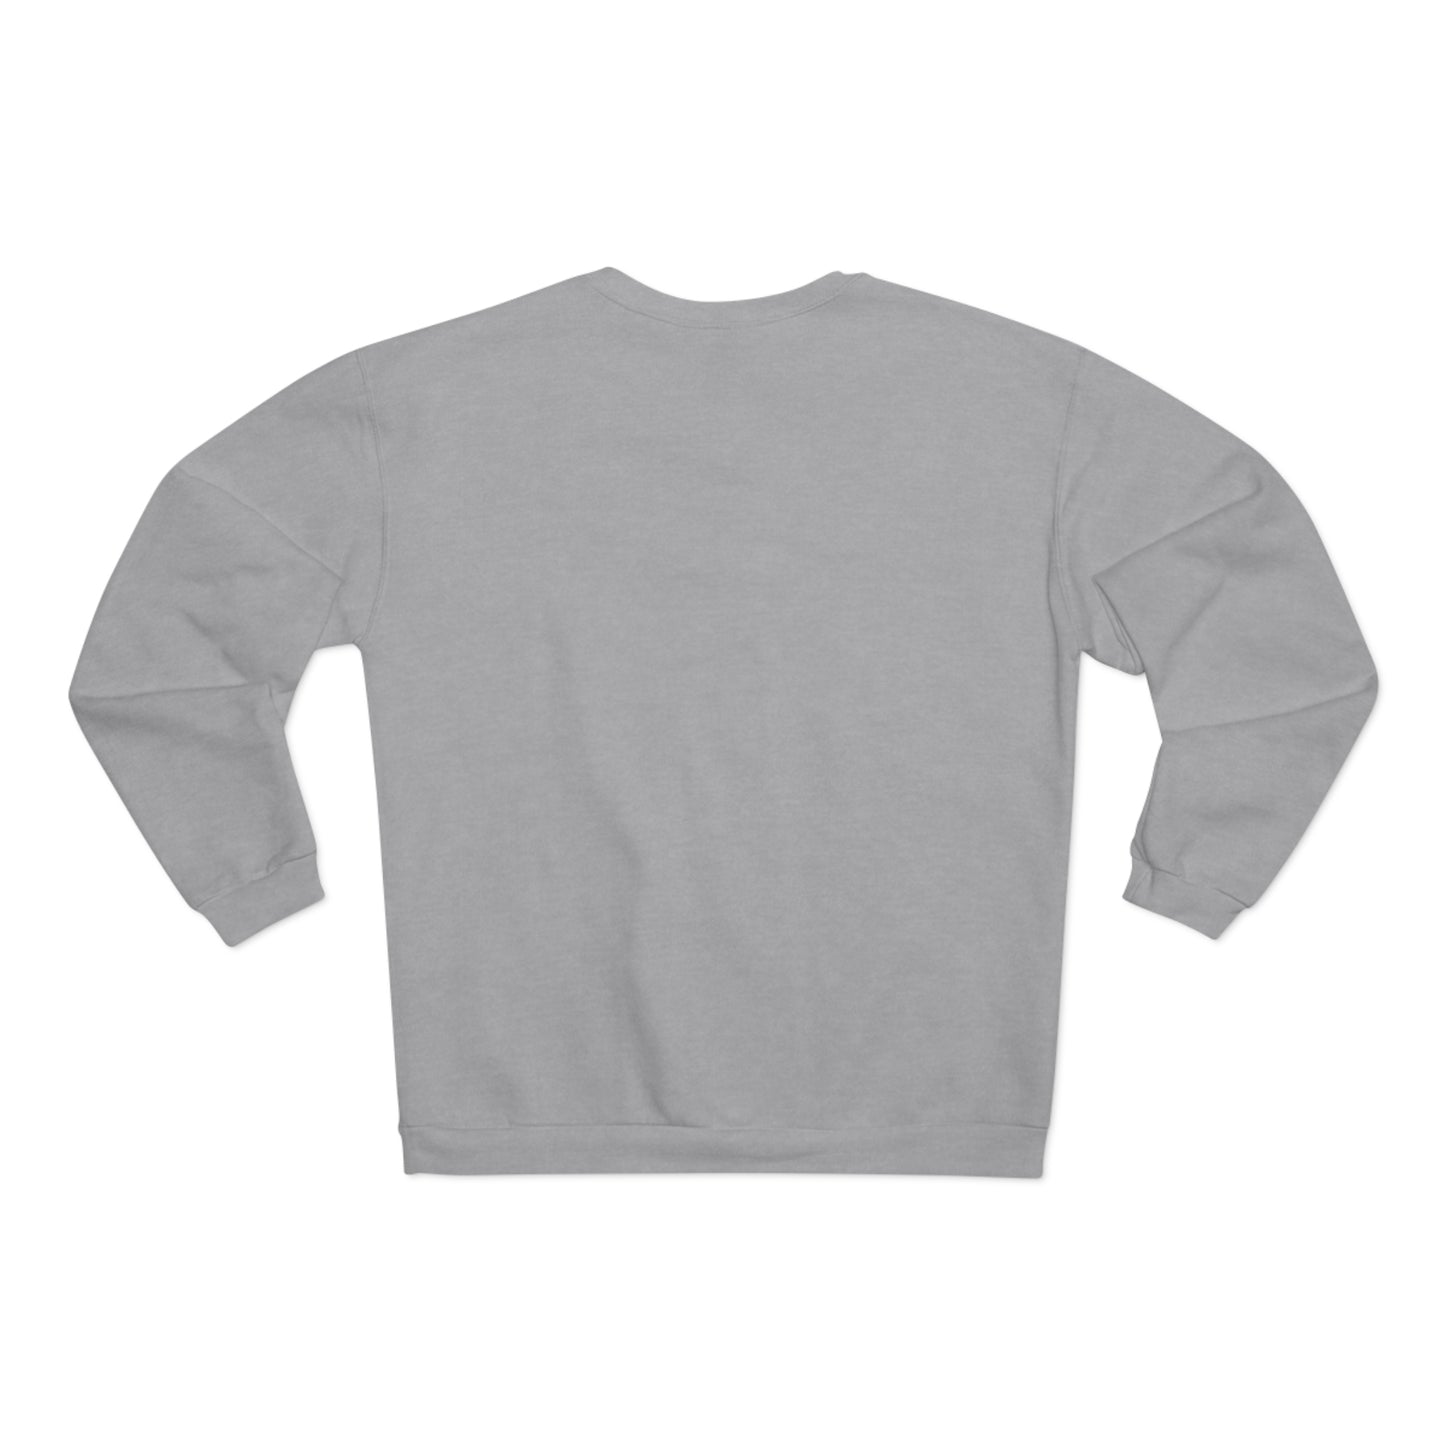 a grey sweatshirt with a white background